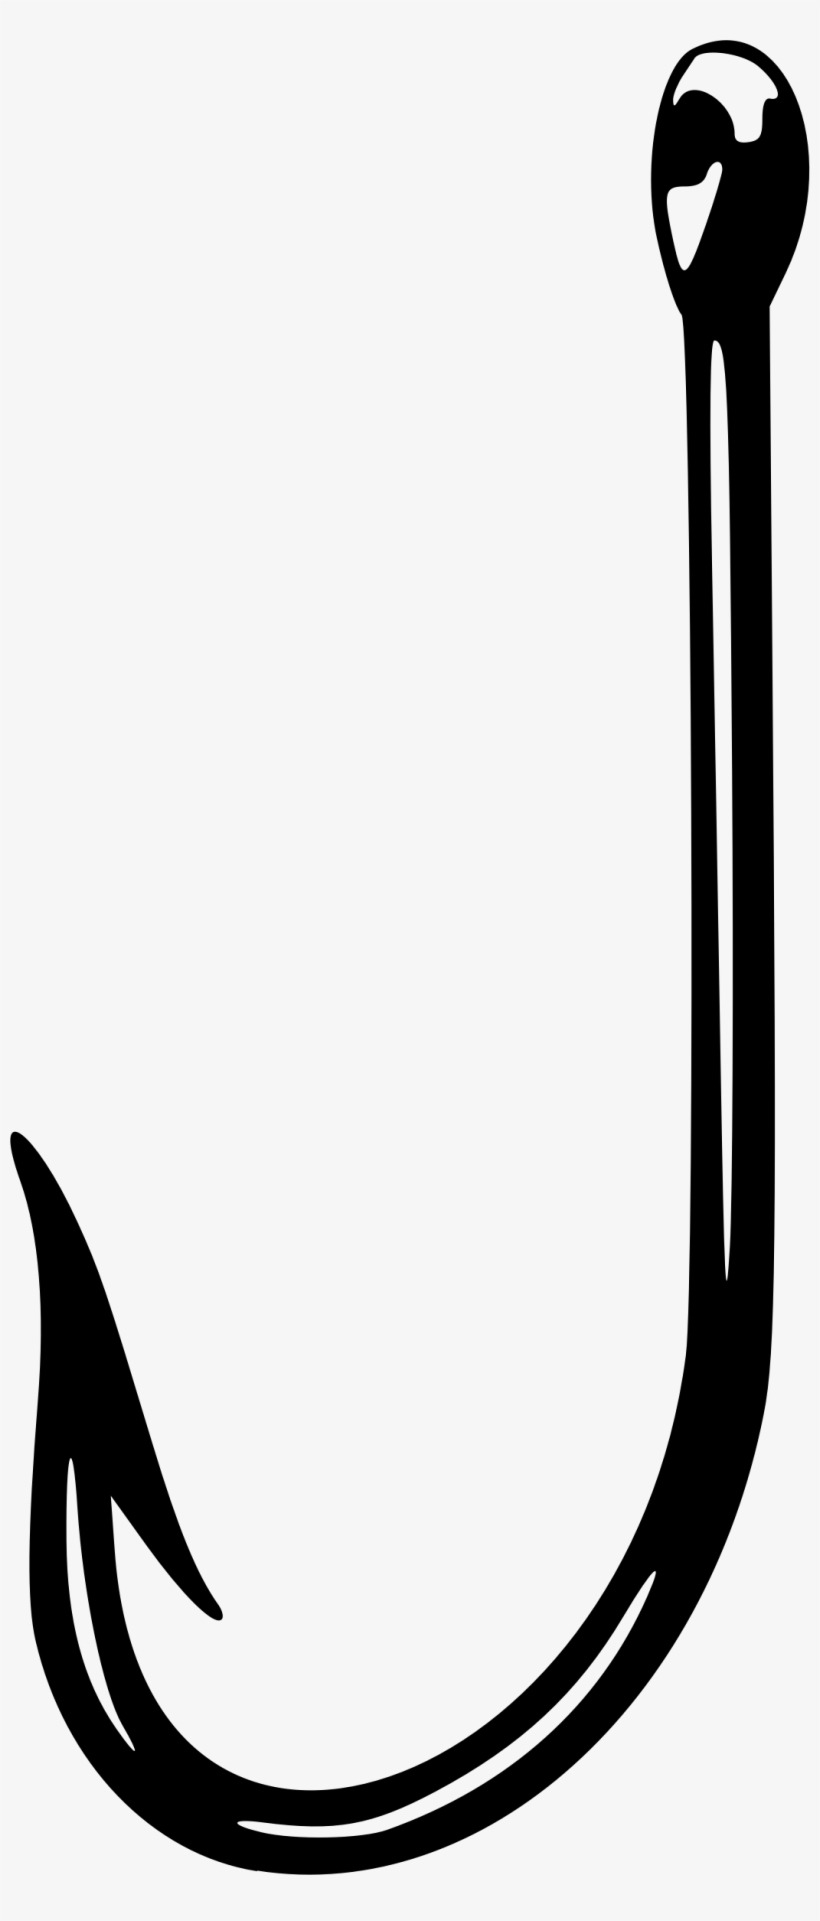 hook clipart black and white